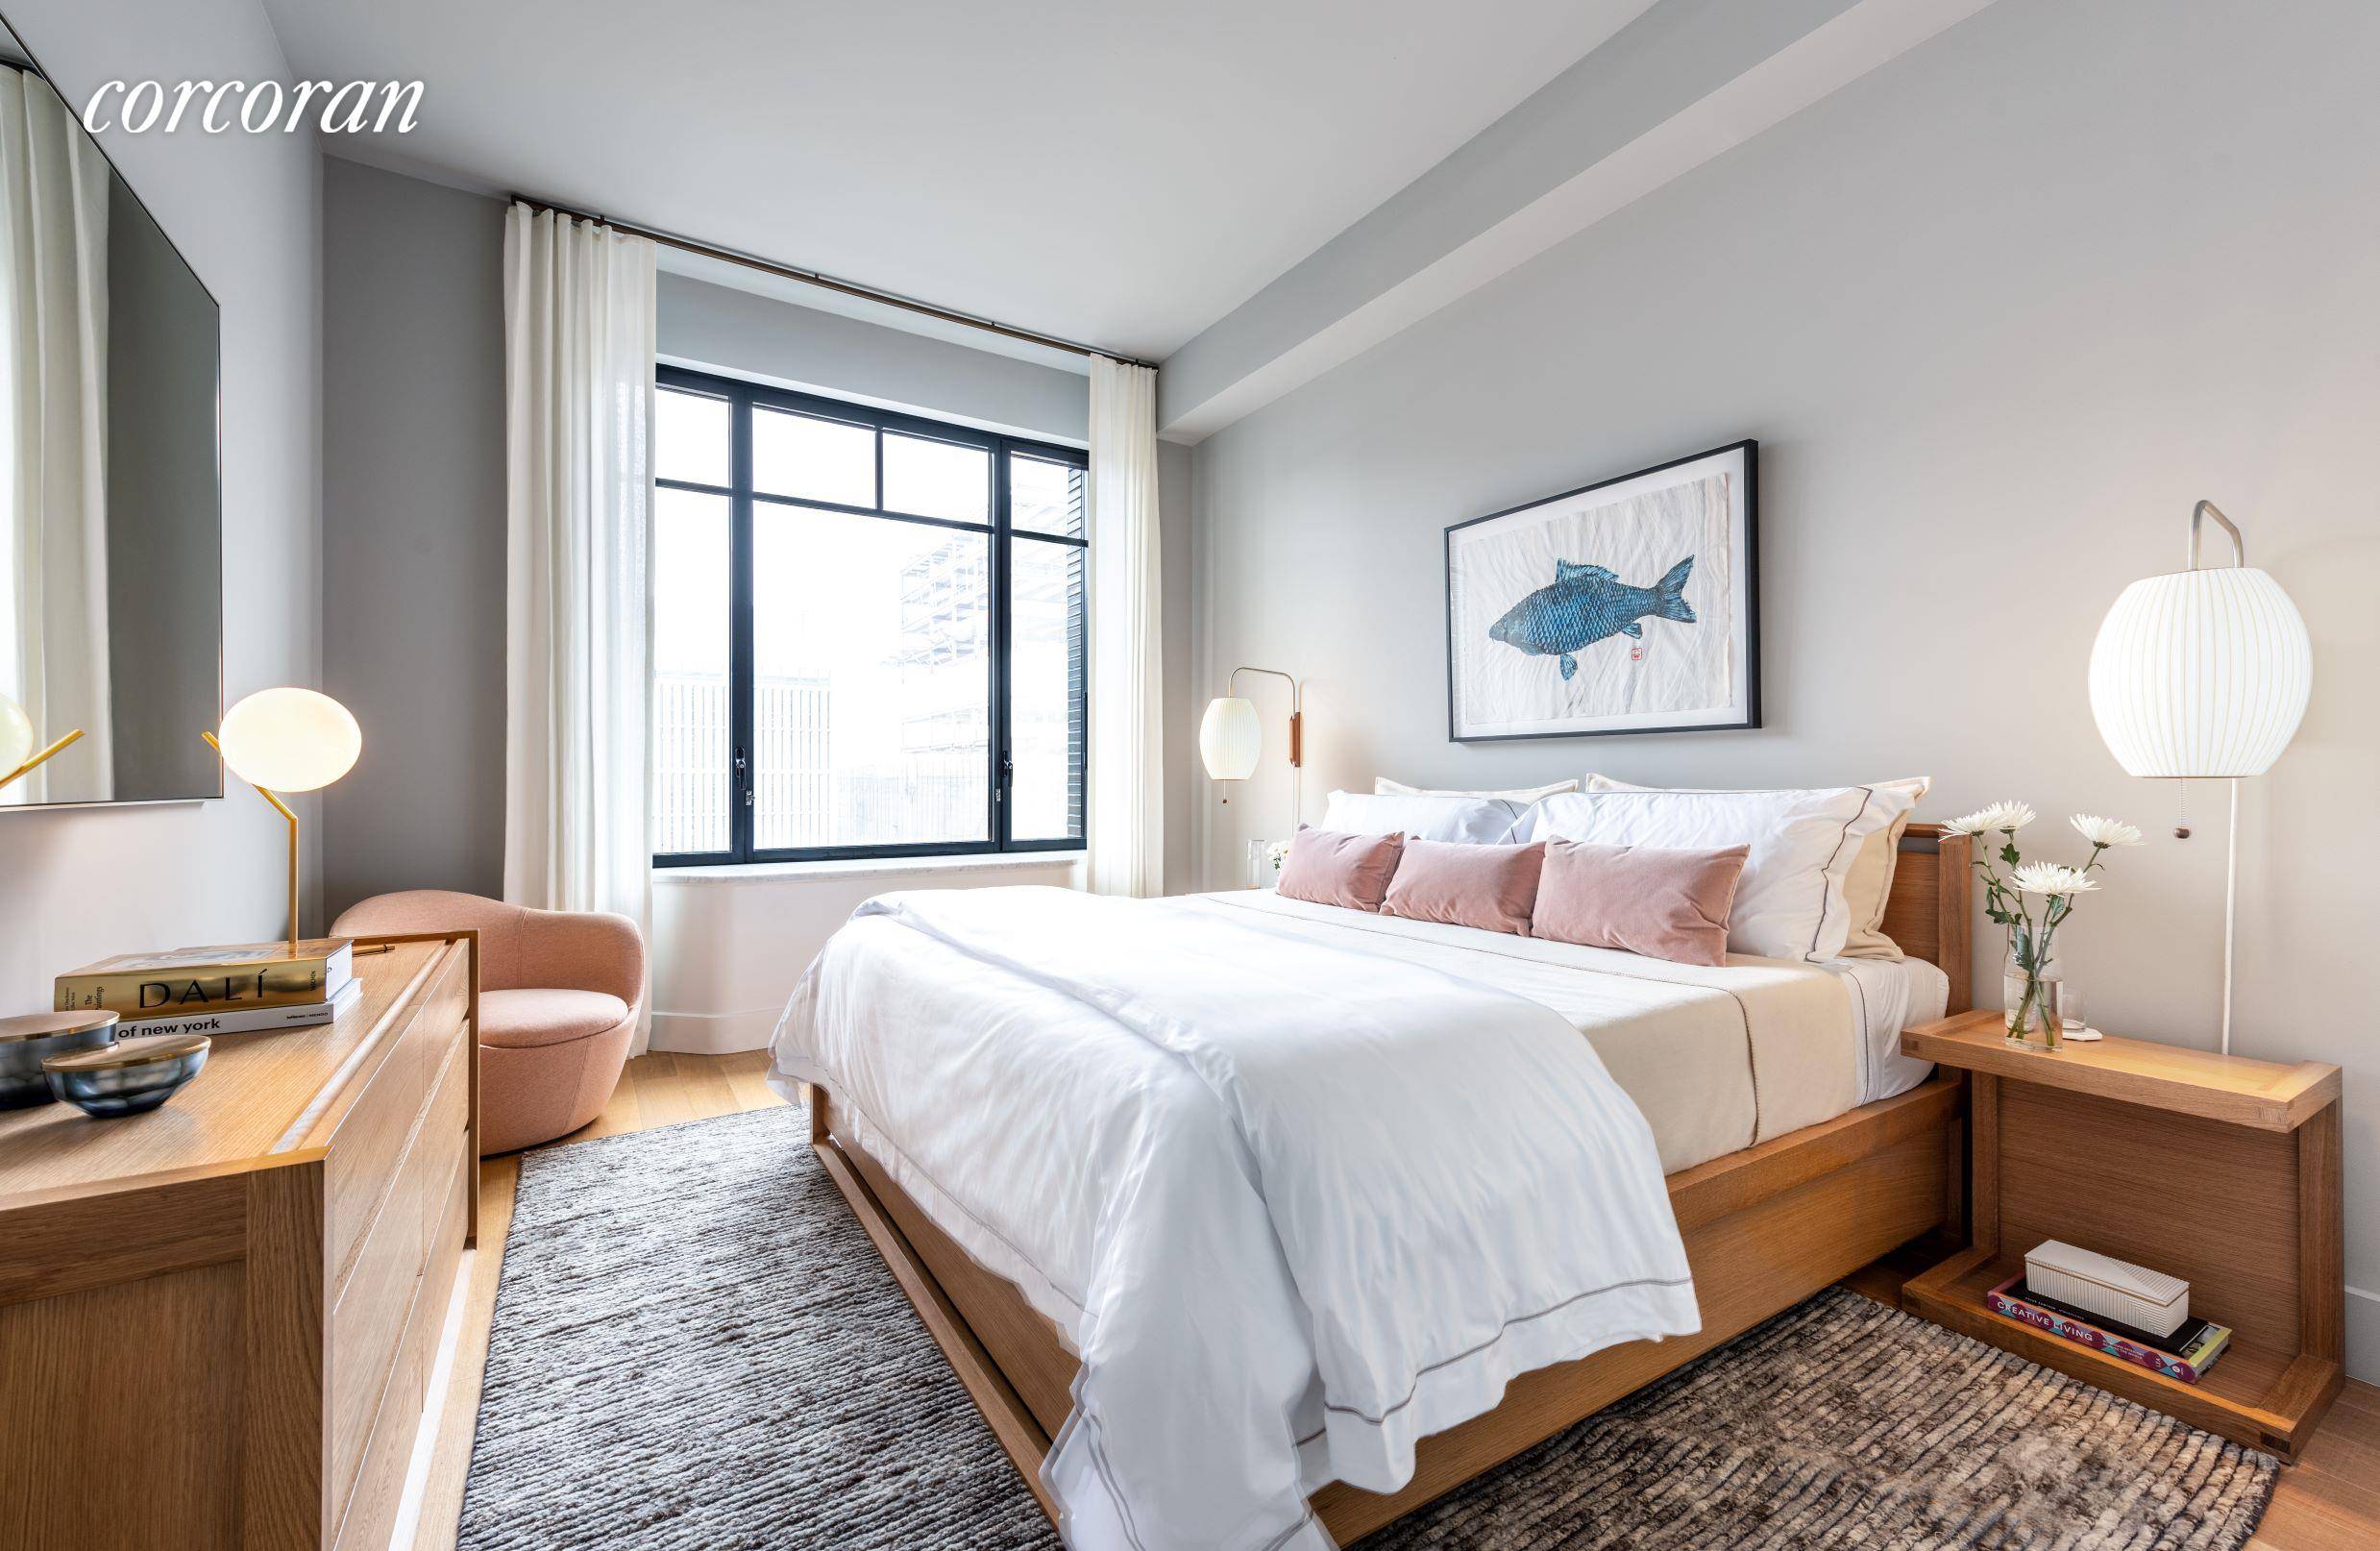 Residence 12F at Greenwich West is a generous one bedroom one and a half bathroom condominium home facing East over Soho.